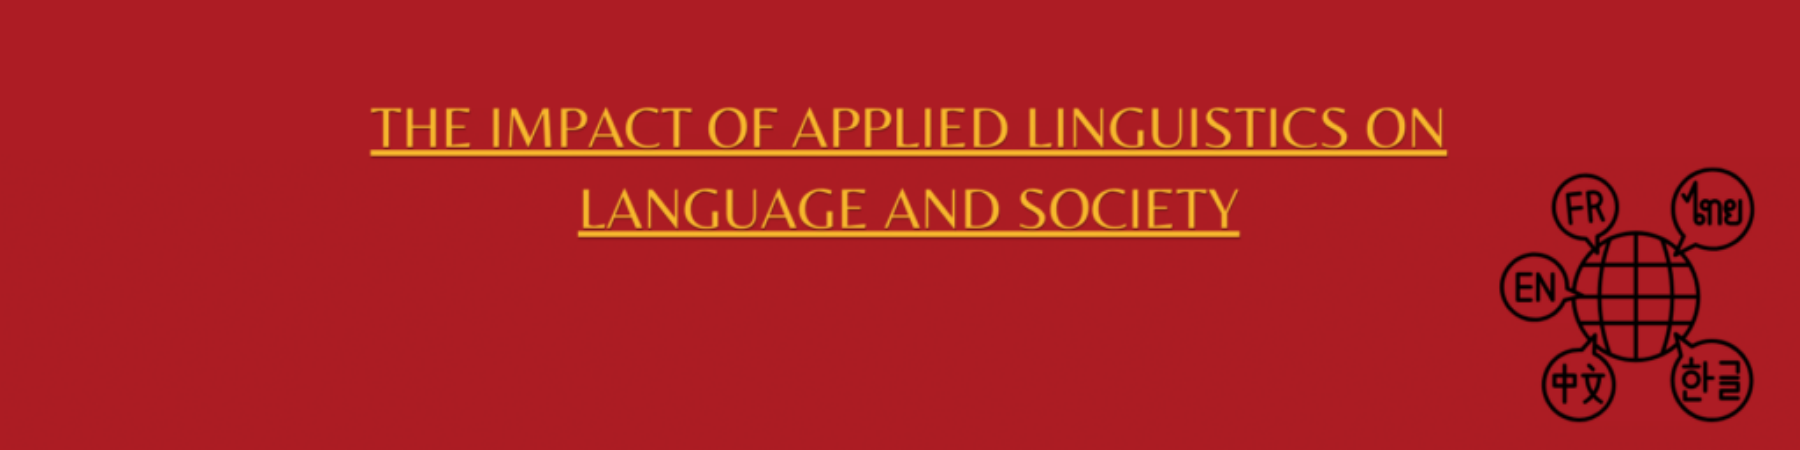 The Impact of Applied Linguistics on Language and Society